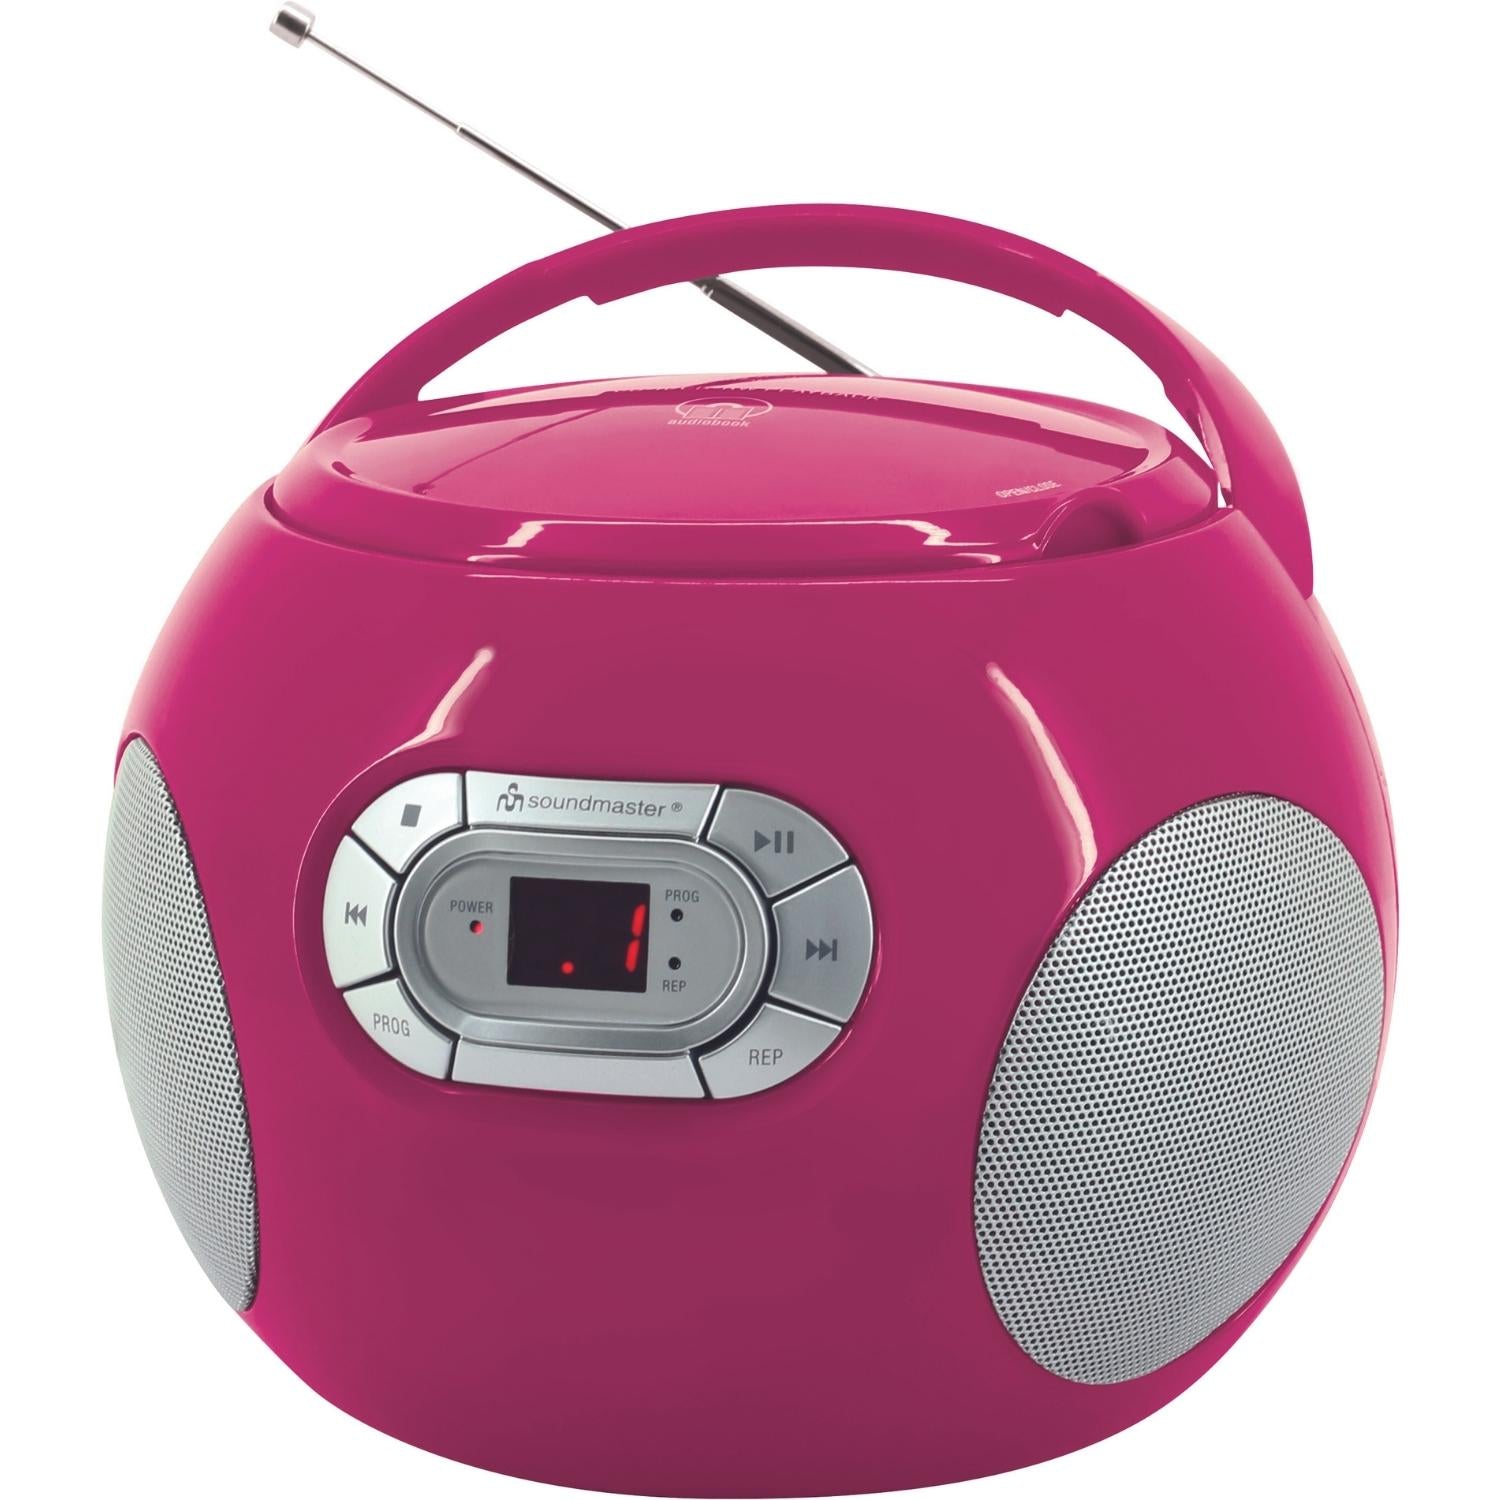 Soundmaster SCD2120PI portable CD player children's audio book function boombox with radio